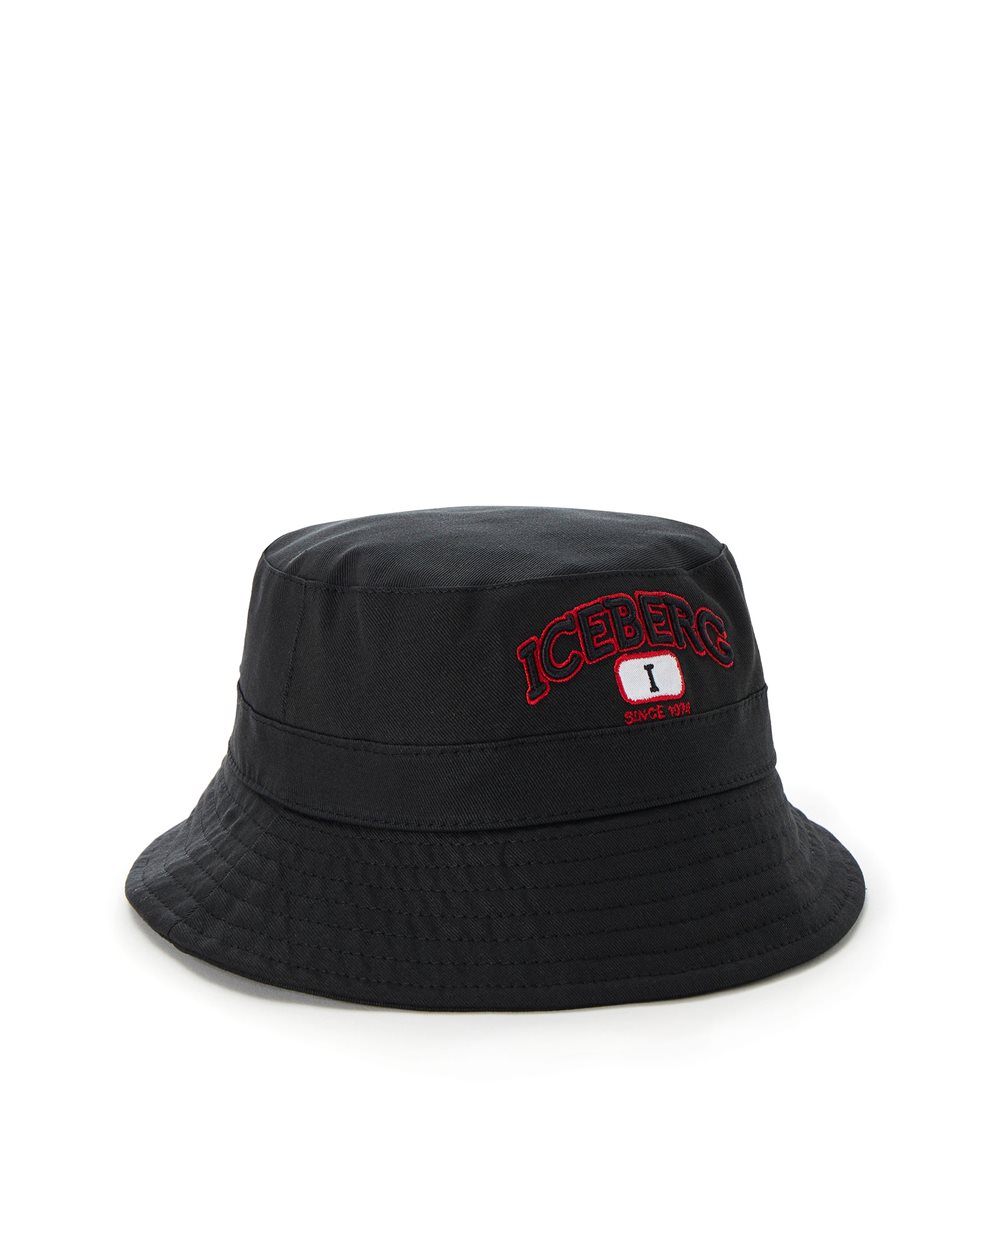 Bucket hat with logo -  ( PRIMO STEP DE ) PROMO SALDI UP TO 40% | Iceberg - Official Website